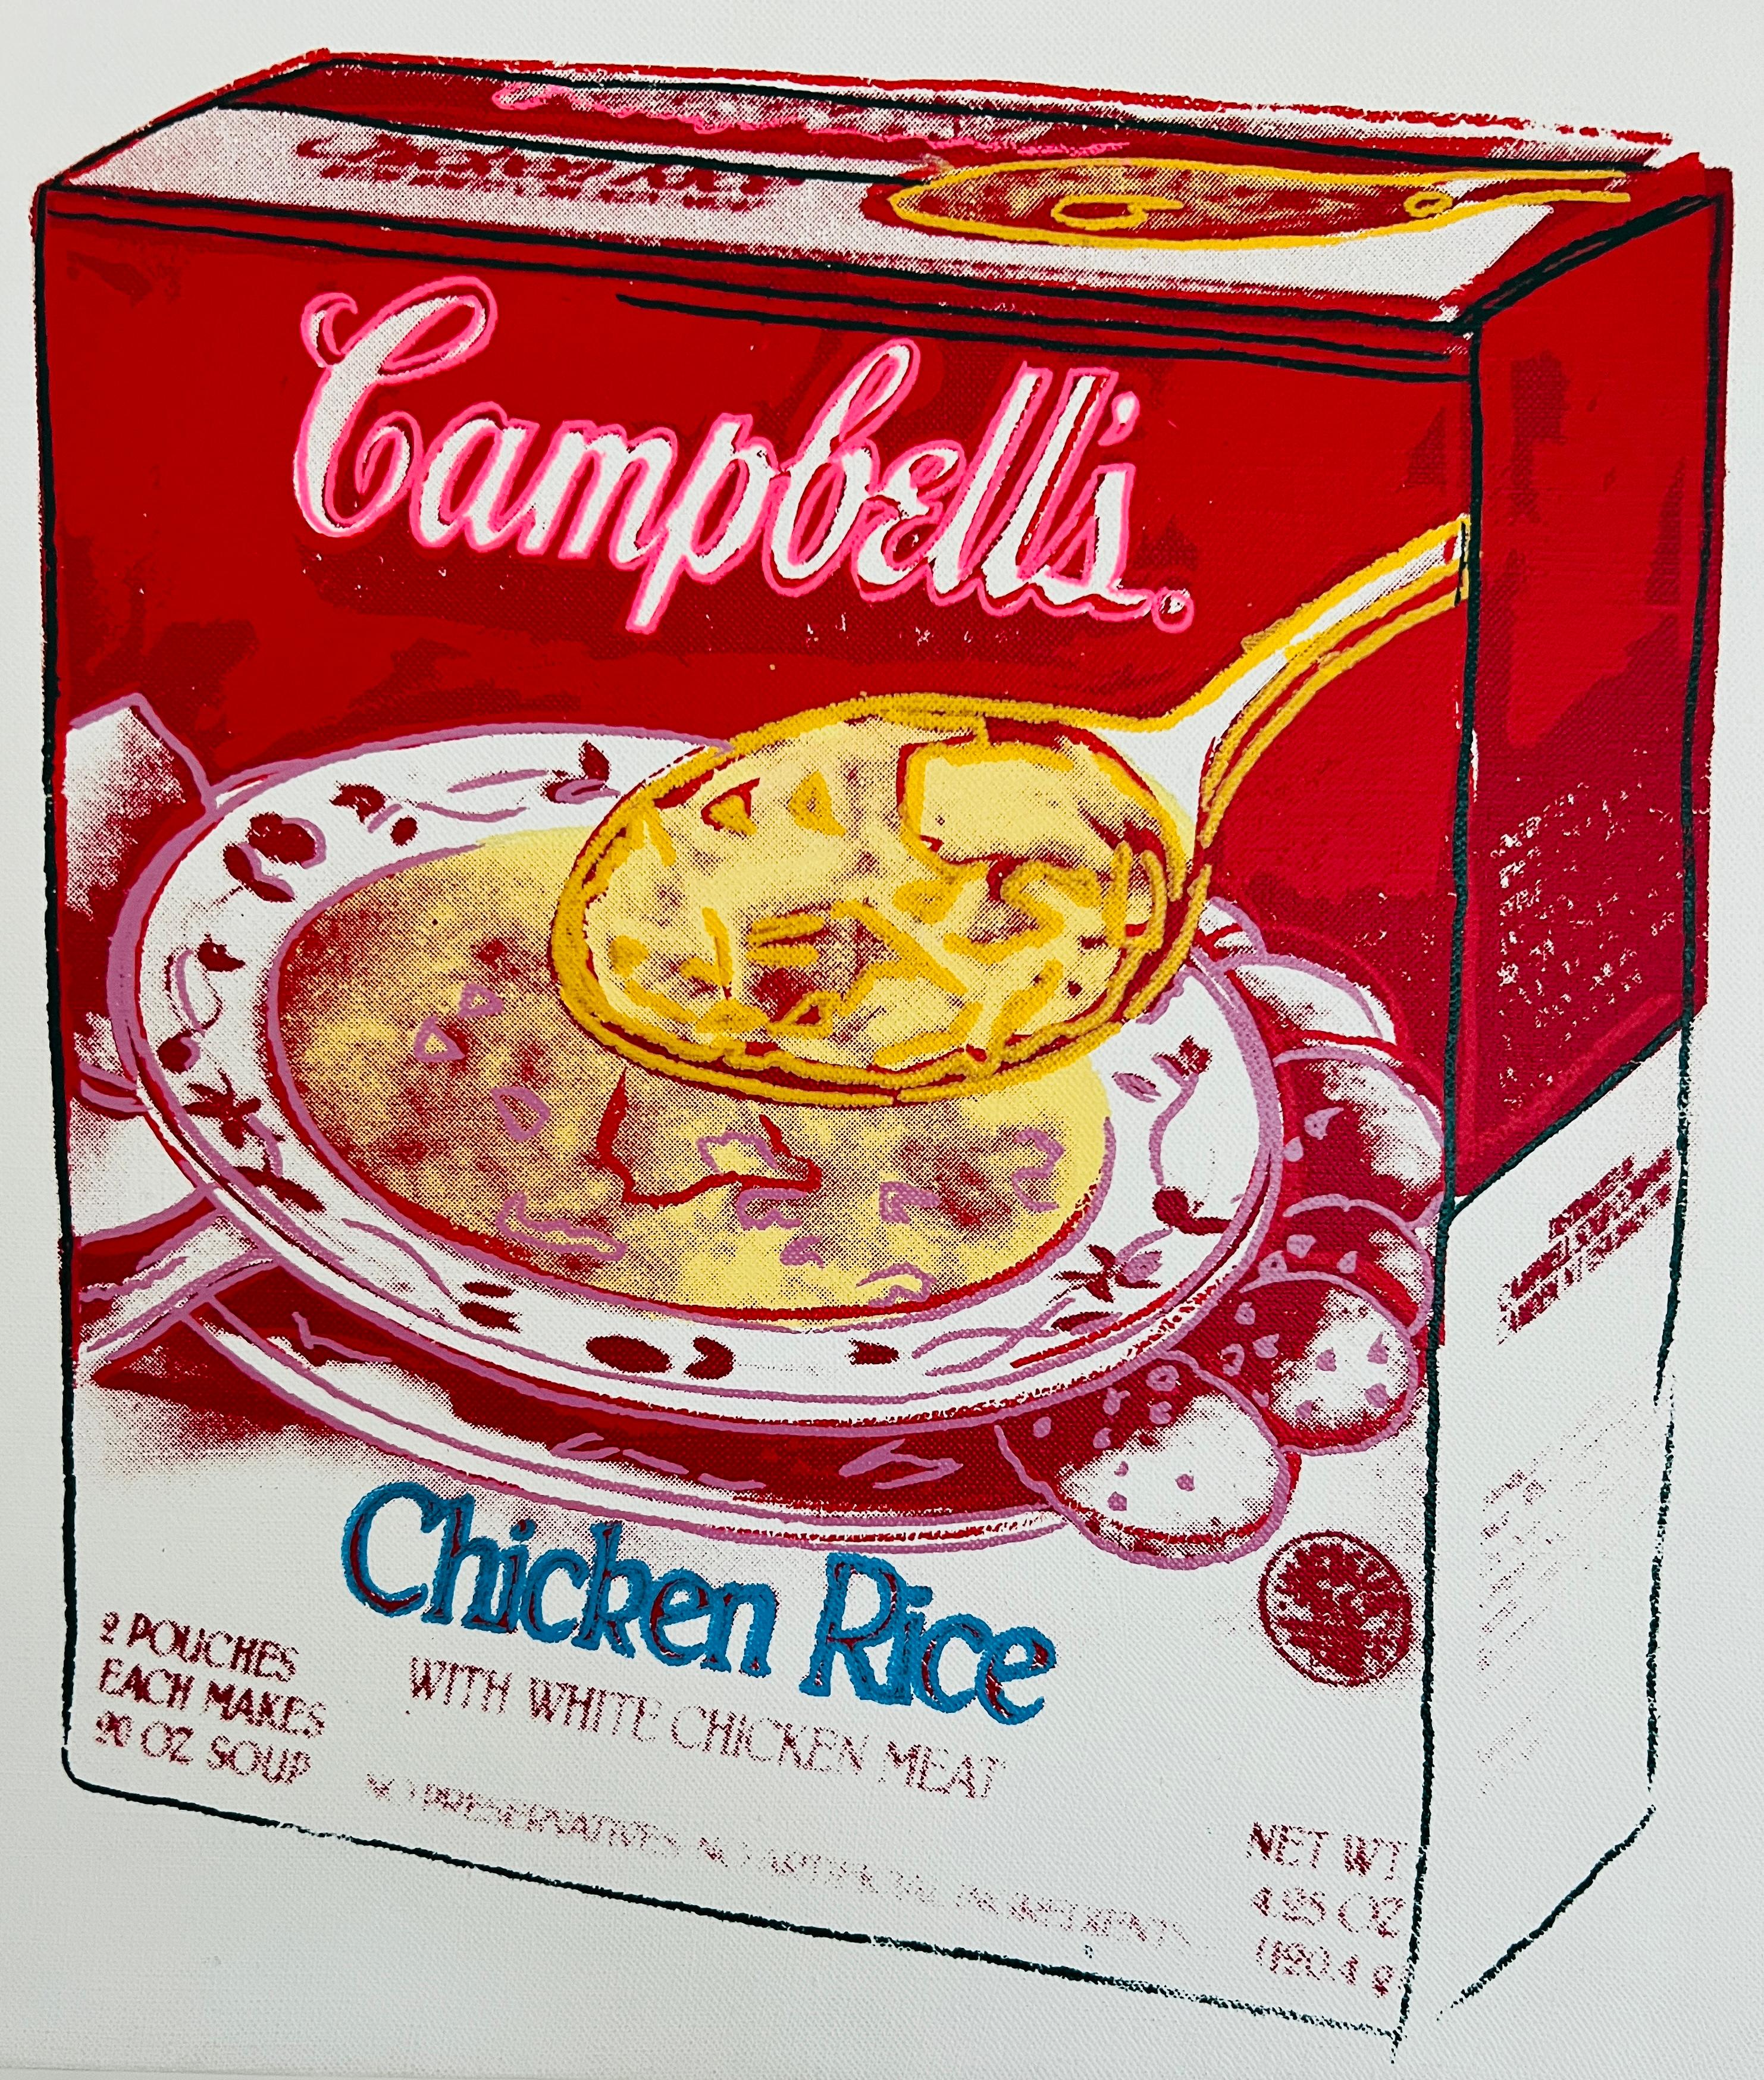 Andy Warhol Figurative Painting - Campbell's Chicken Rice Soup Box